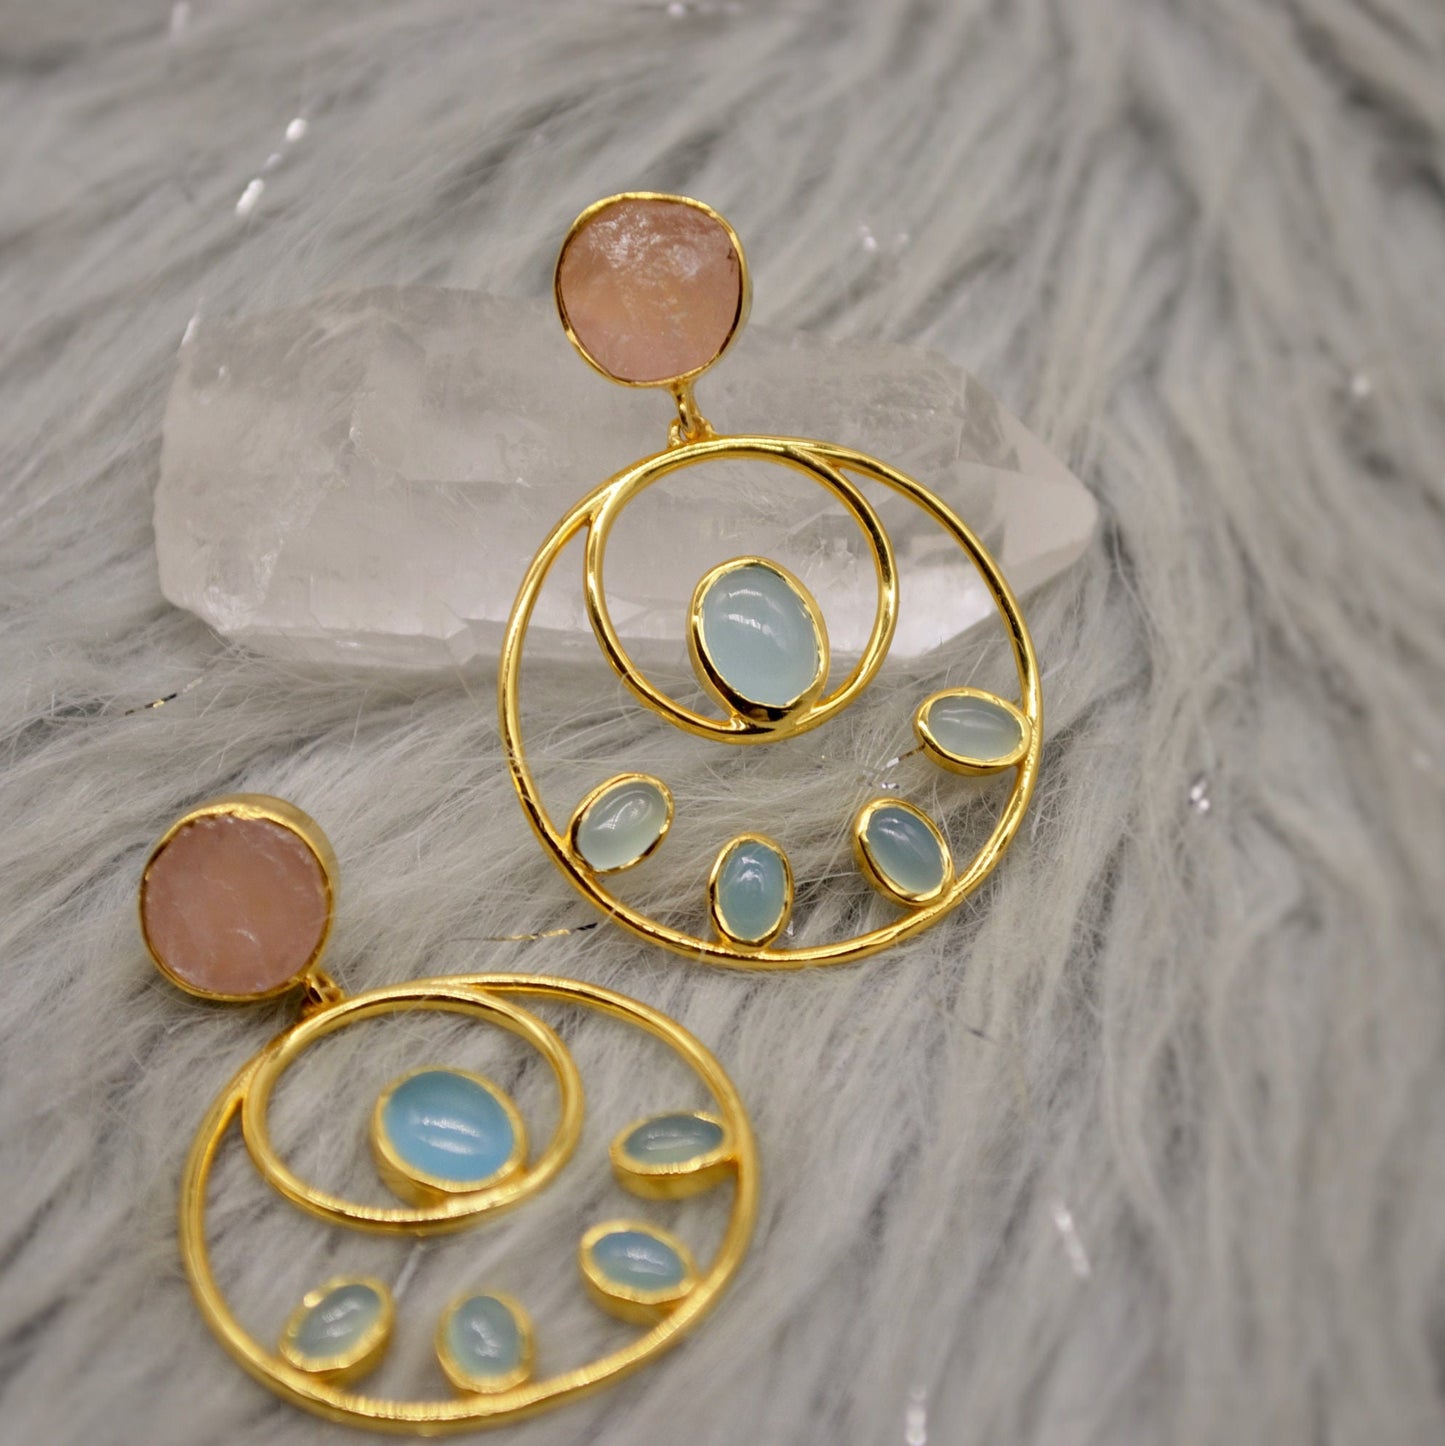 Rose Quartz, Aqua Blue Chalcedony Earrings, Gold Plated Sterling Silver Gemstone Earrings, Unique Hoops, Birthday Gifts For Her